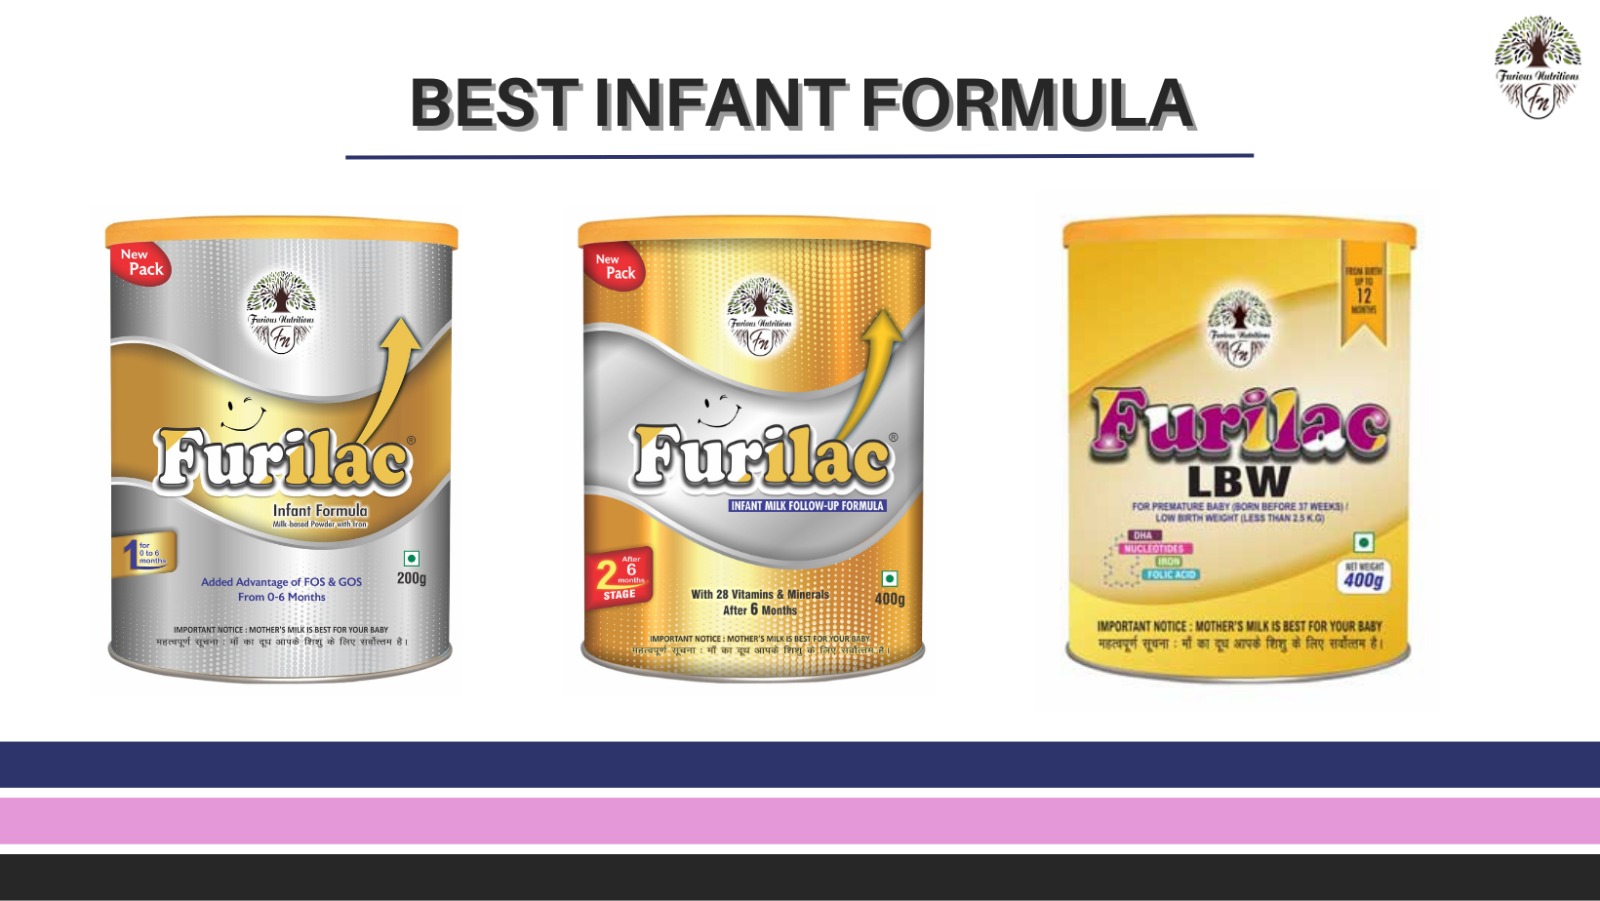 Furilac Stage 1, Furilac Stage 2, and Furilac LBW by Furious Nutritions